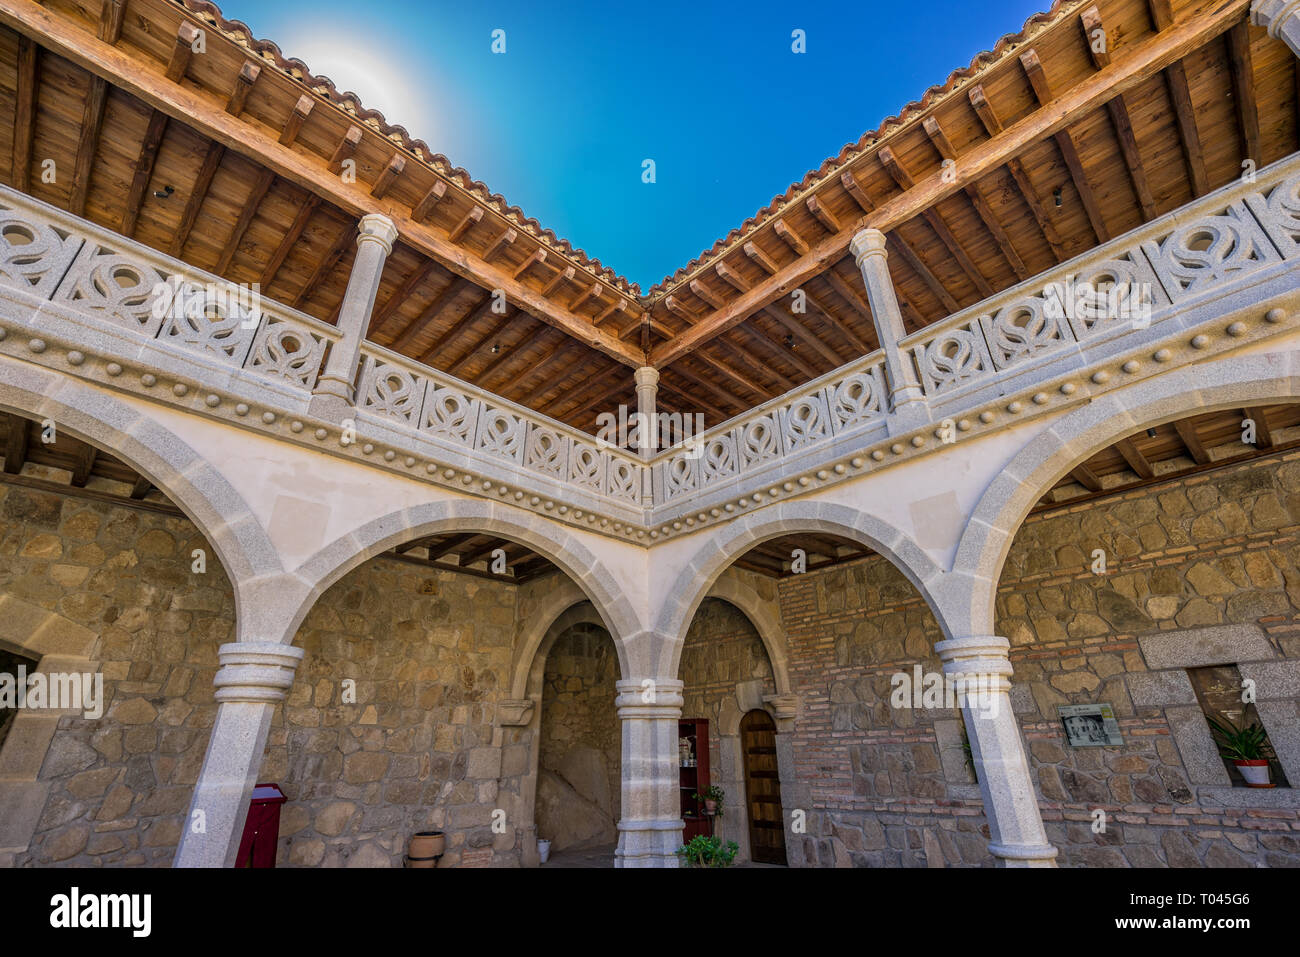 Stone Made Patio Balcony And Wooden Ceiling At Castillo De